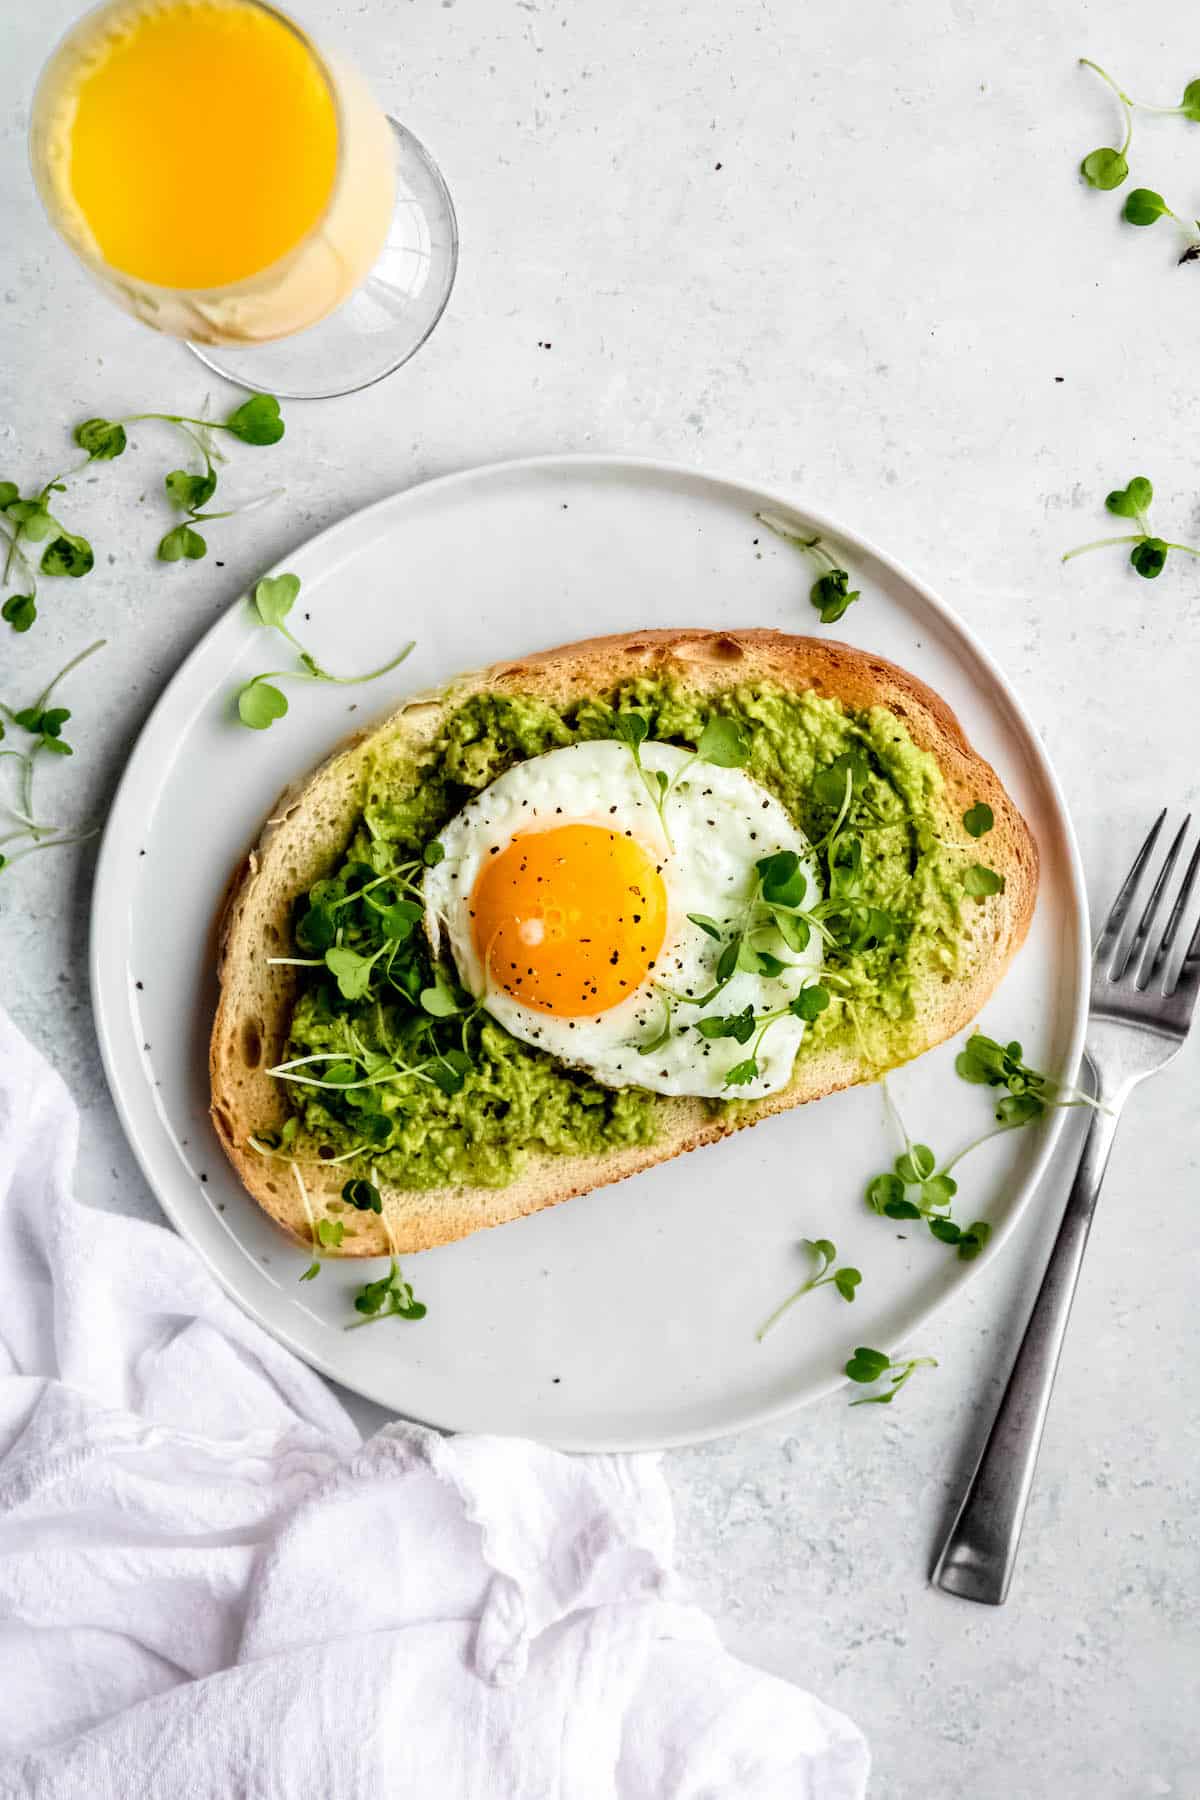 flat lay hero shot of an avocado tartine topped with a sunny side up egg on a white plate garnished with microgreens next to an orange mimosa.